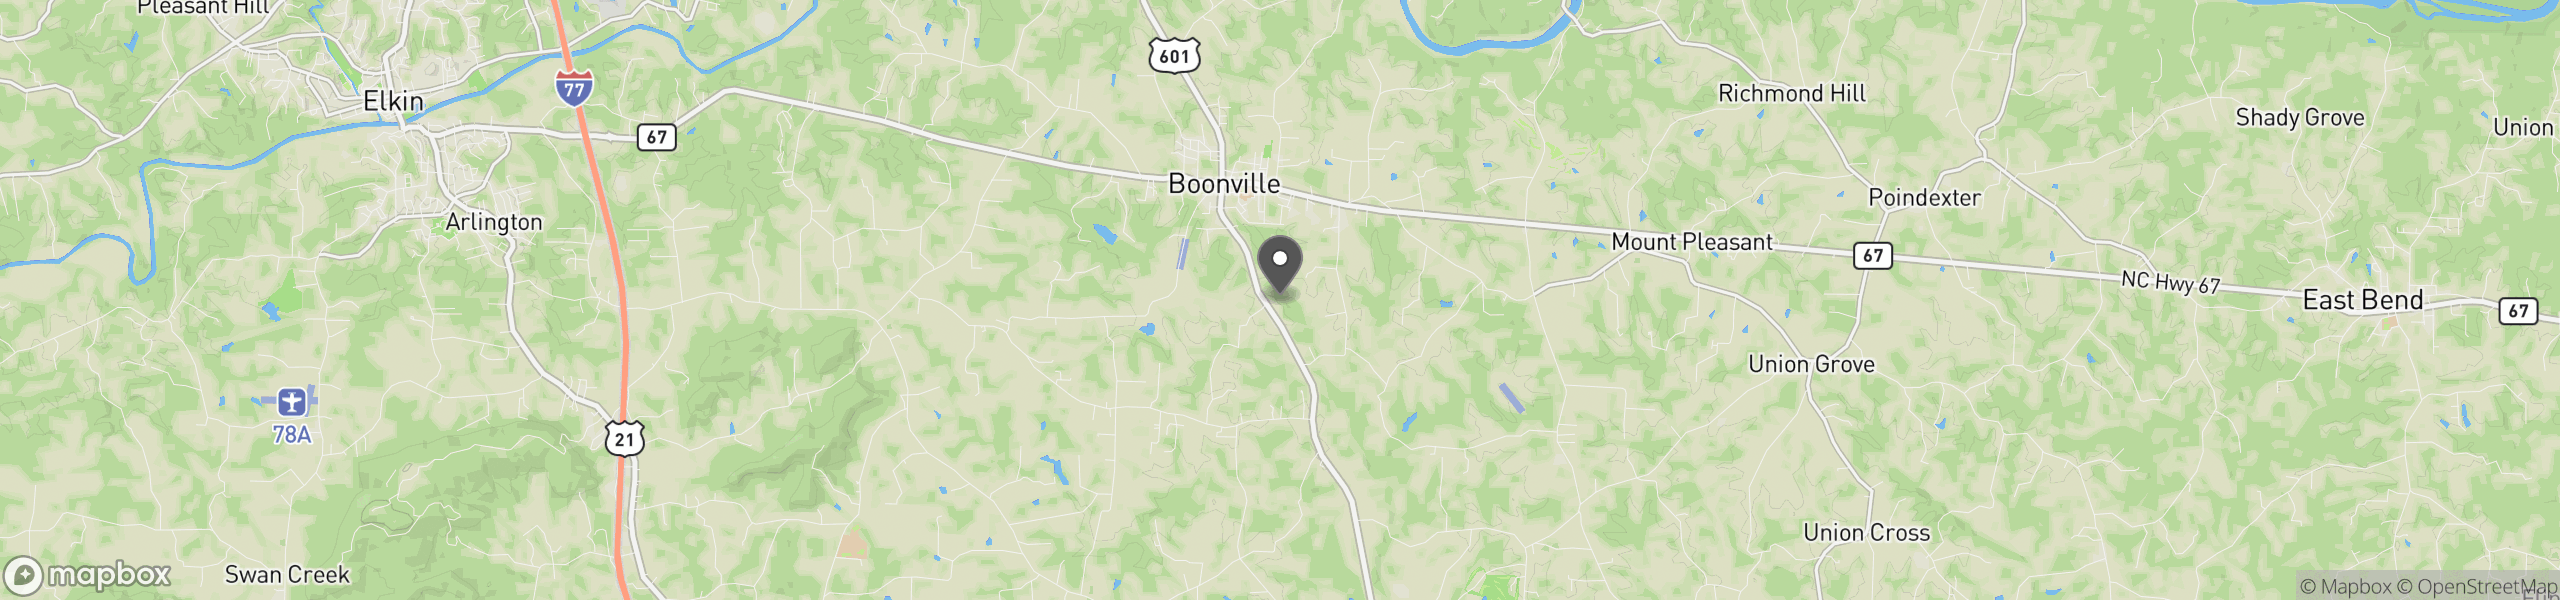 Boonville, NC 27011